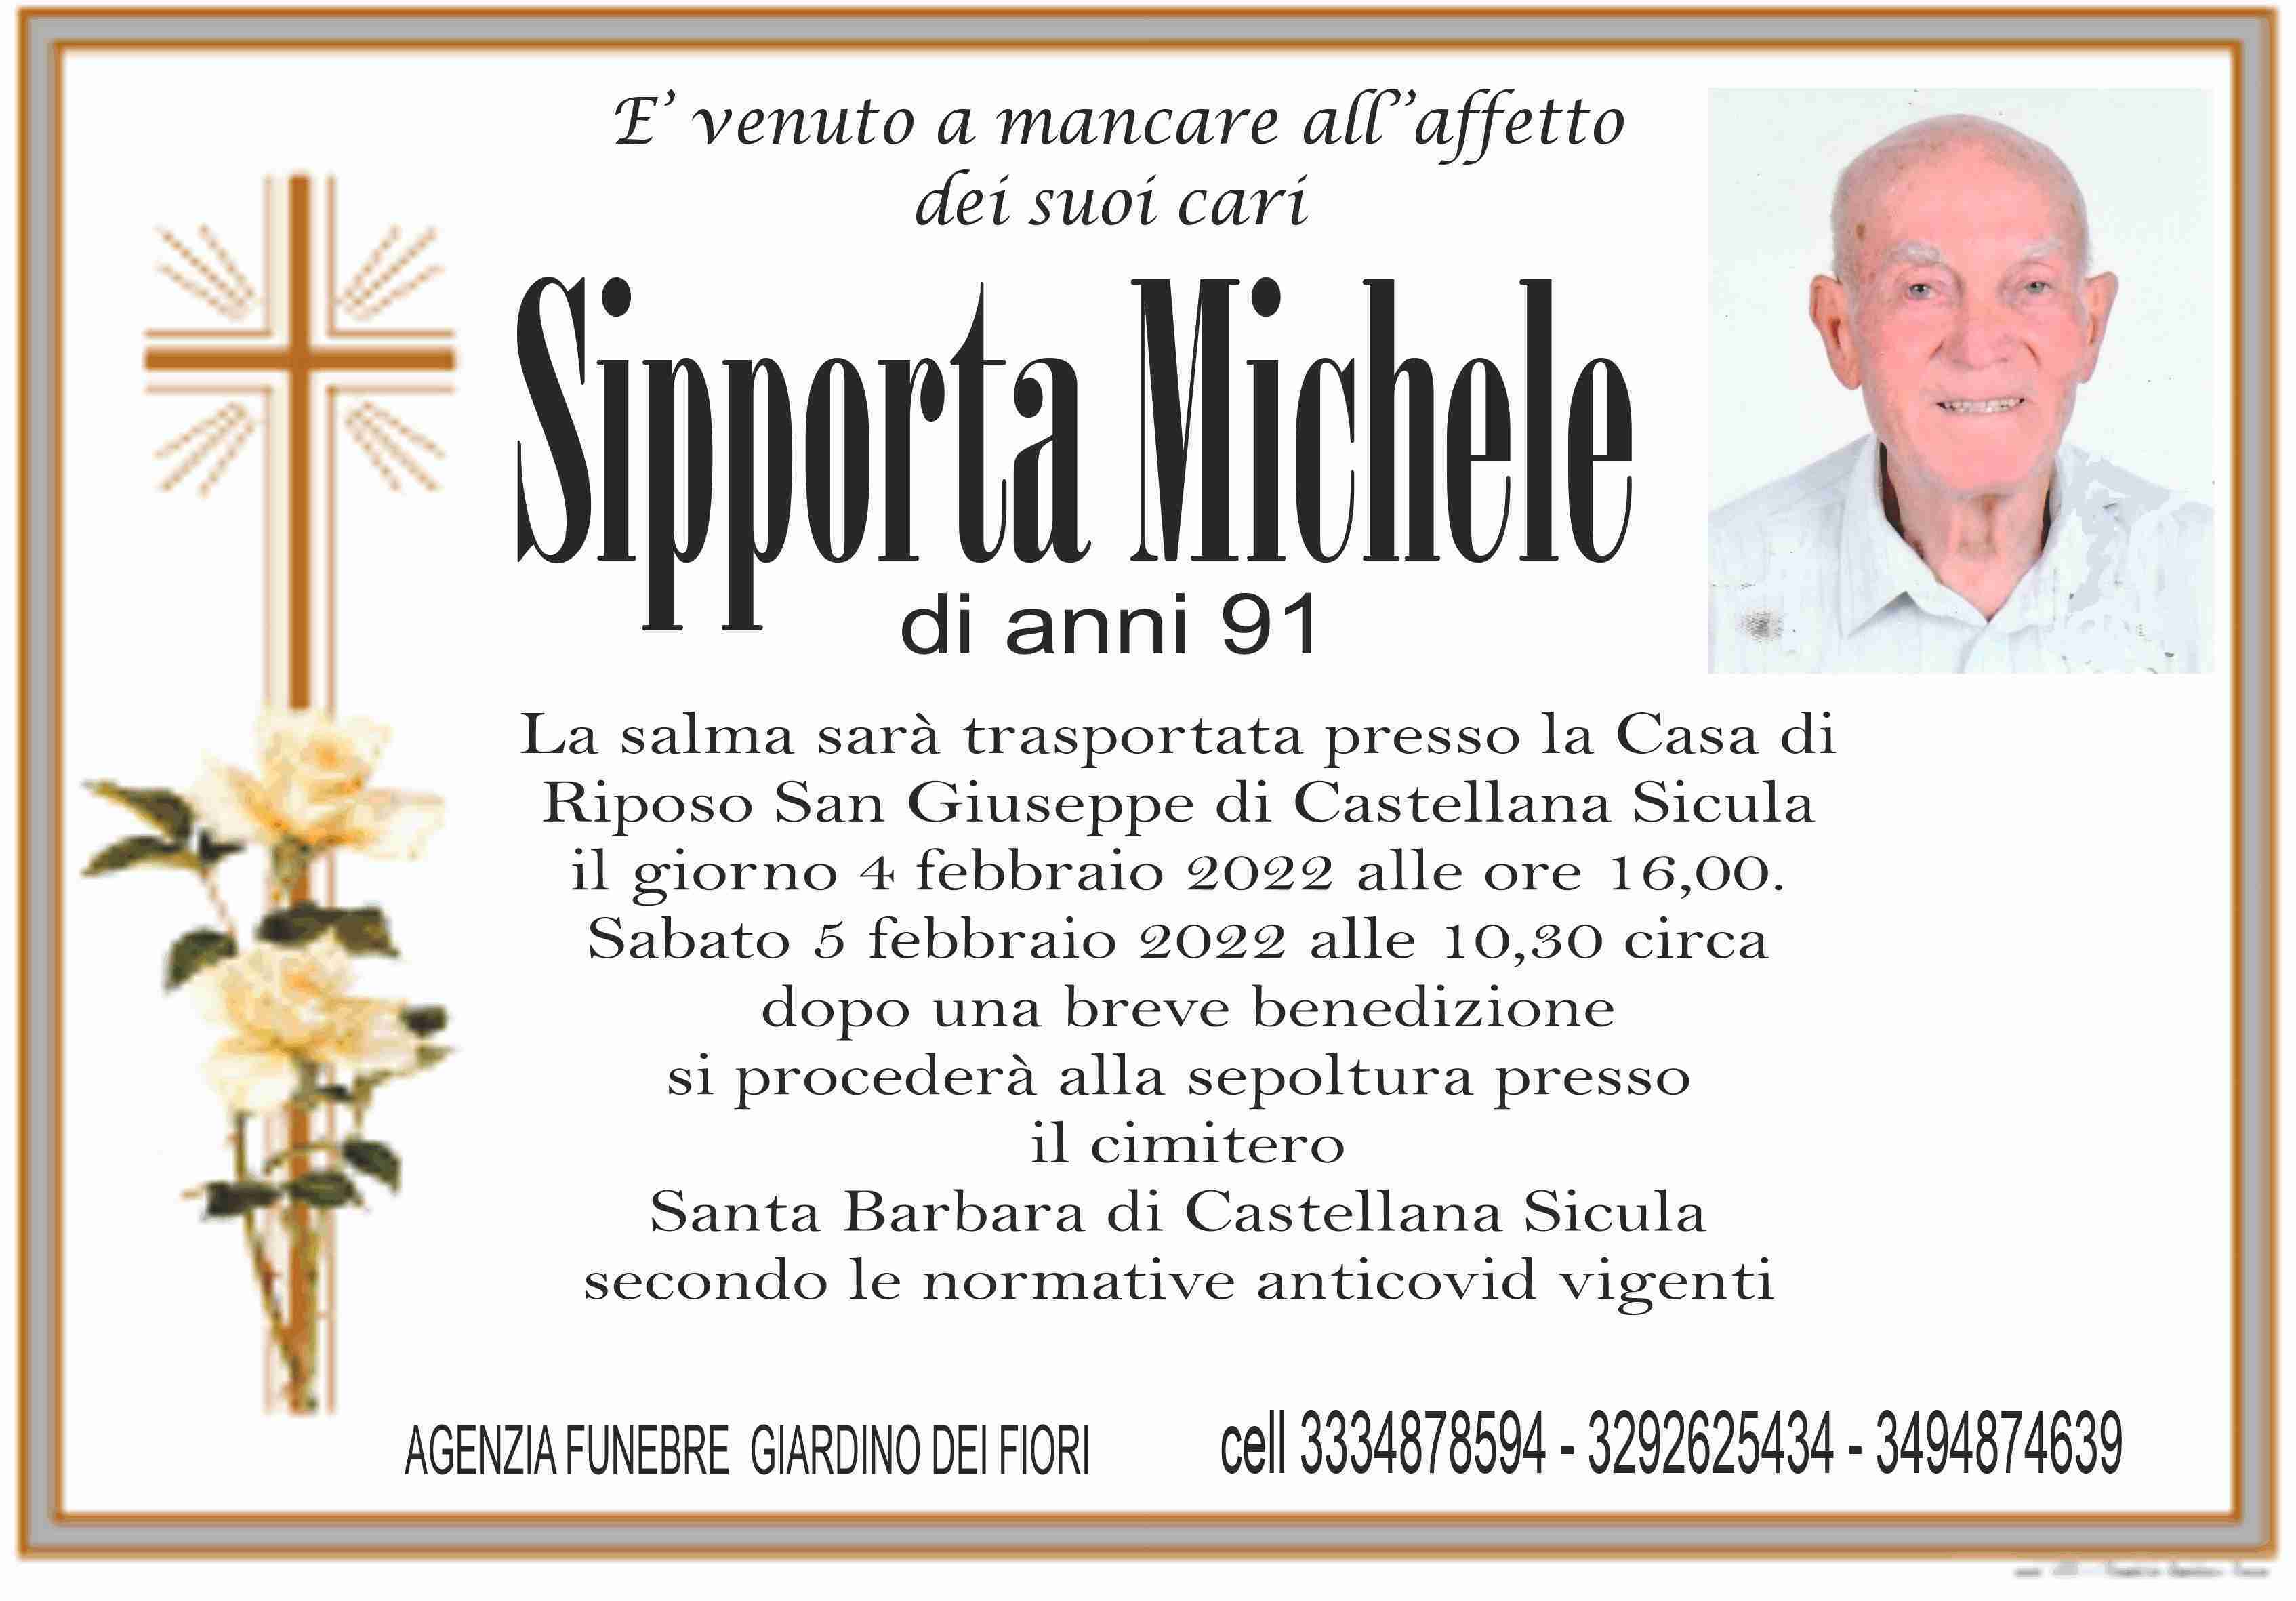 Michele Sipporta